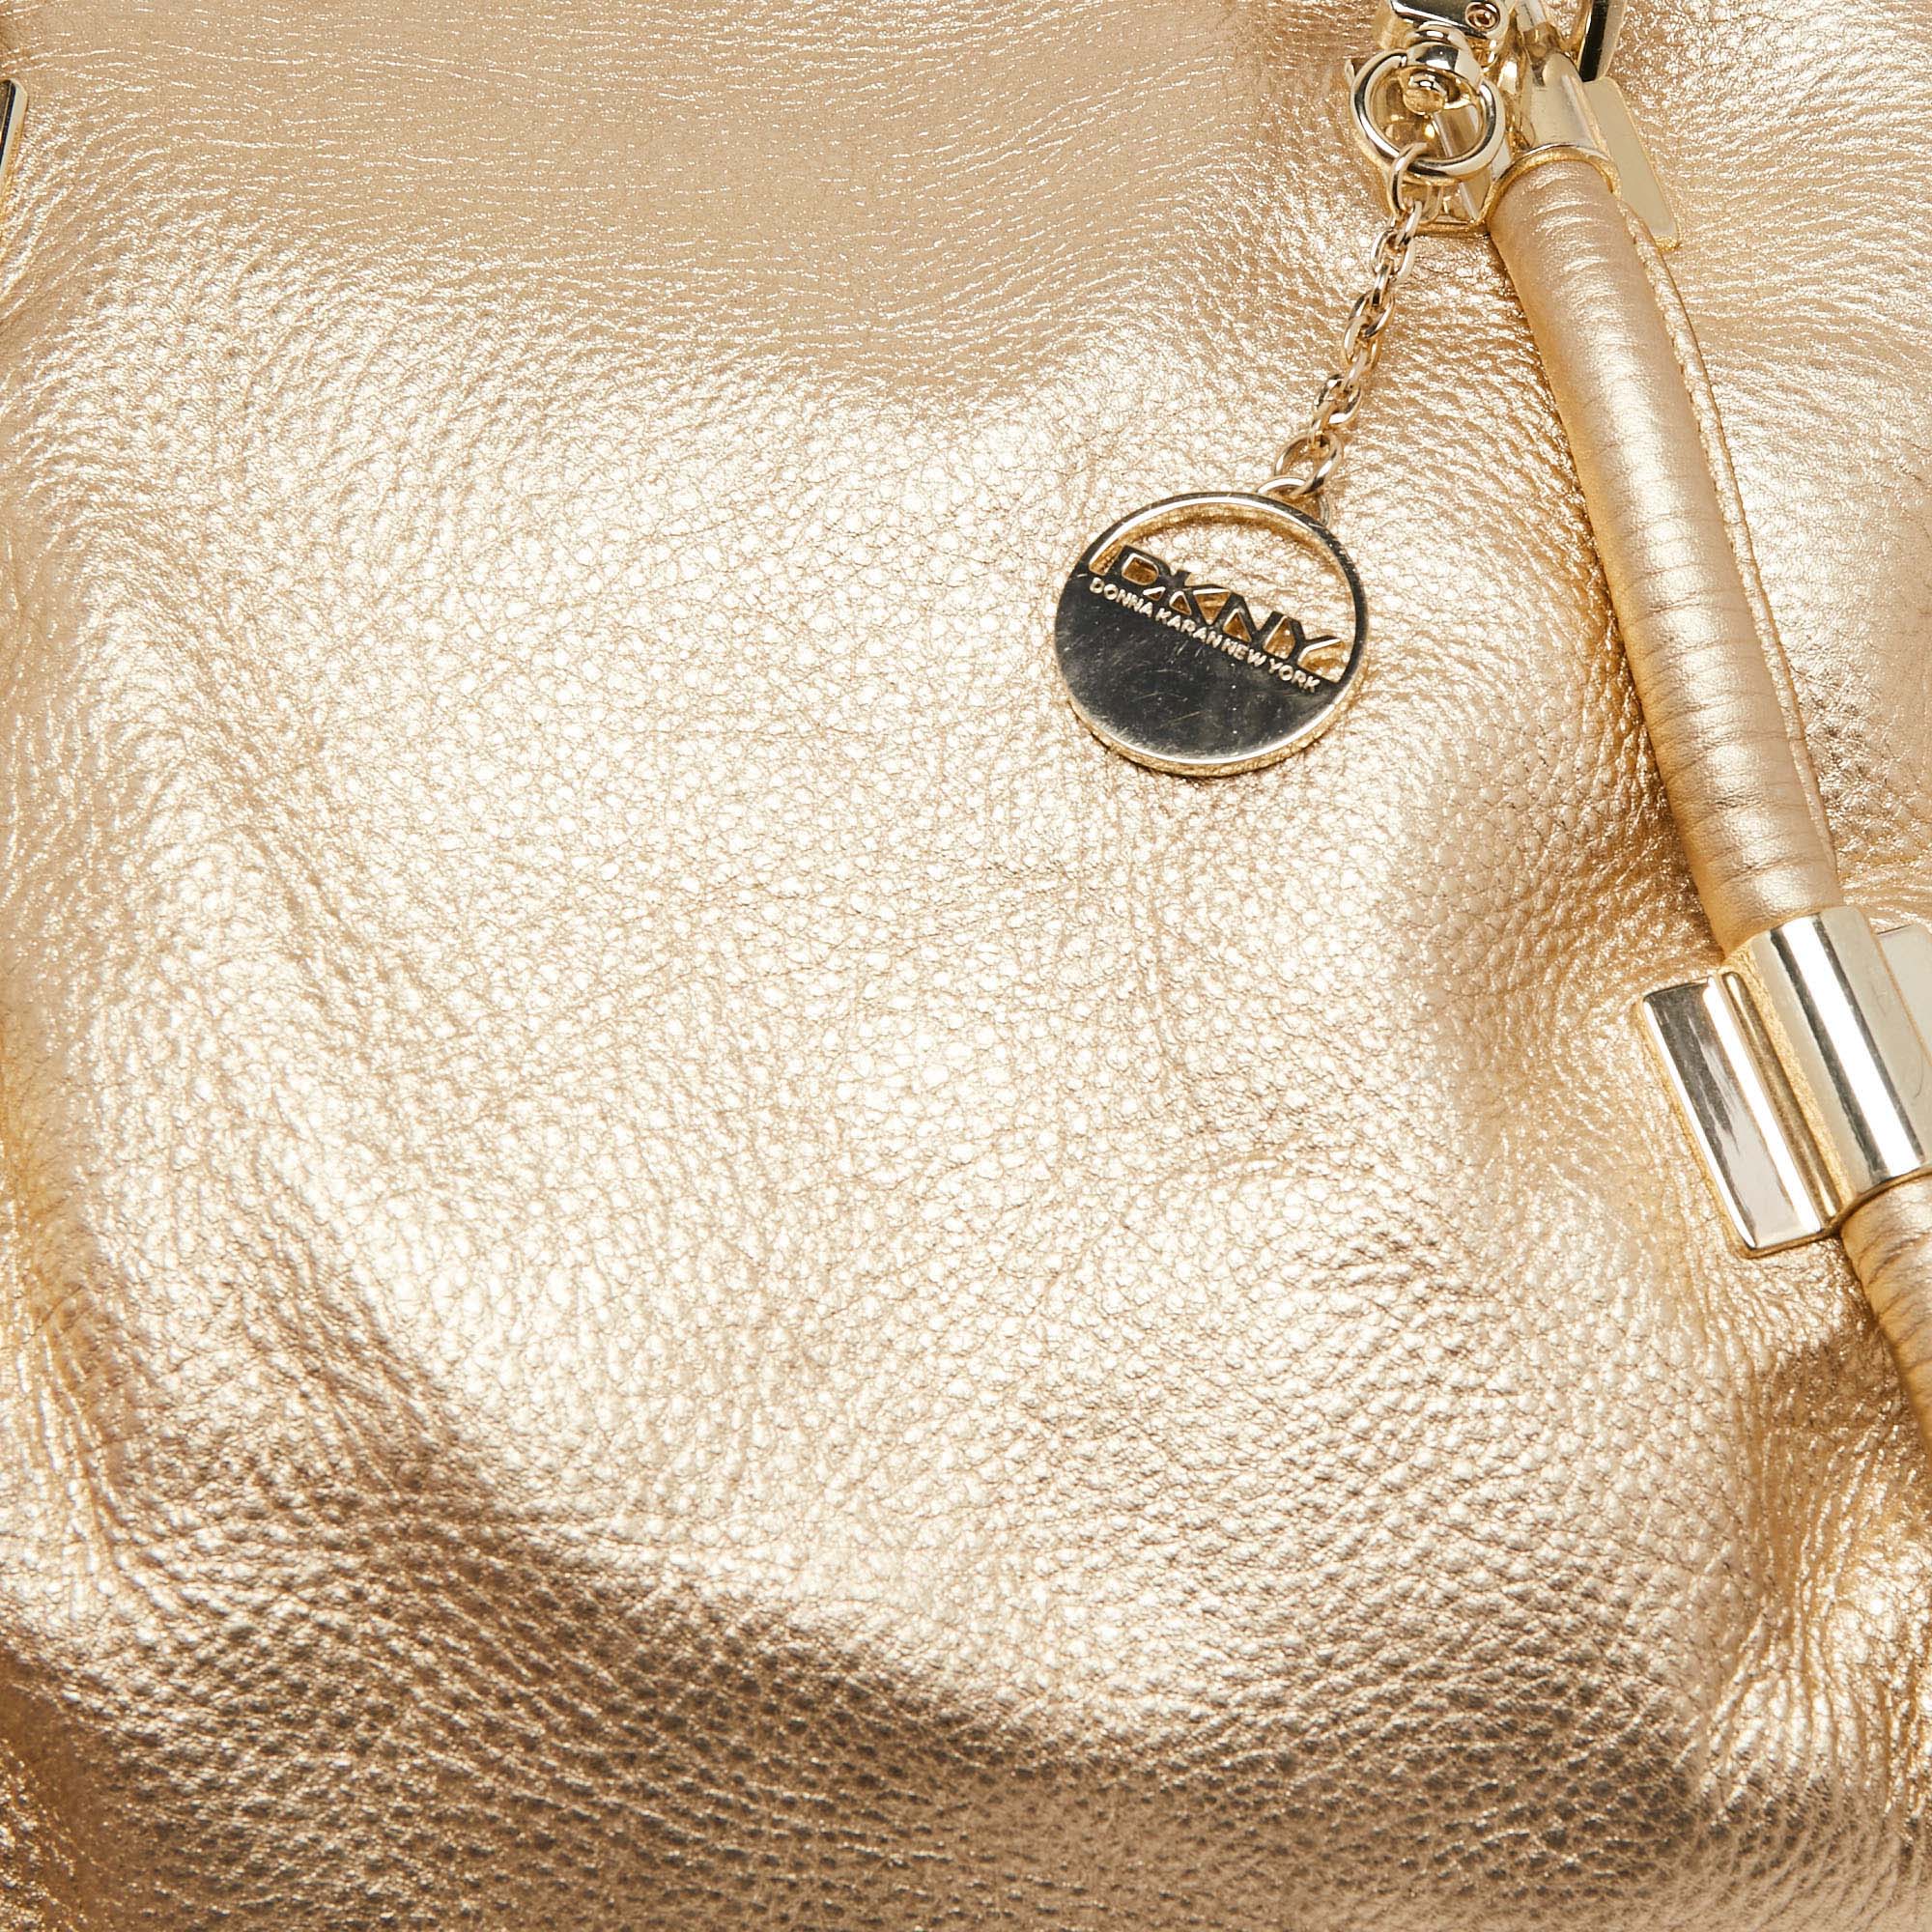 DKNY Gold Leather Chain Tote